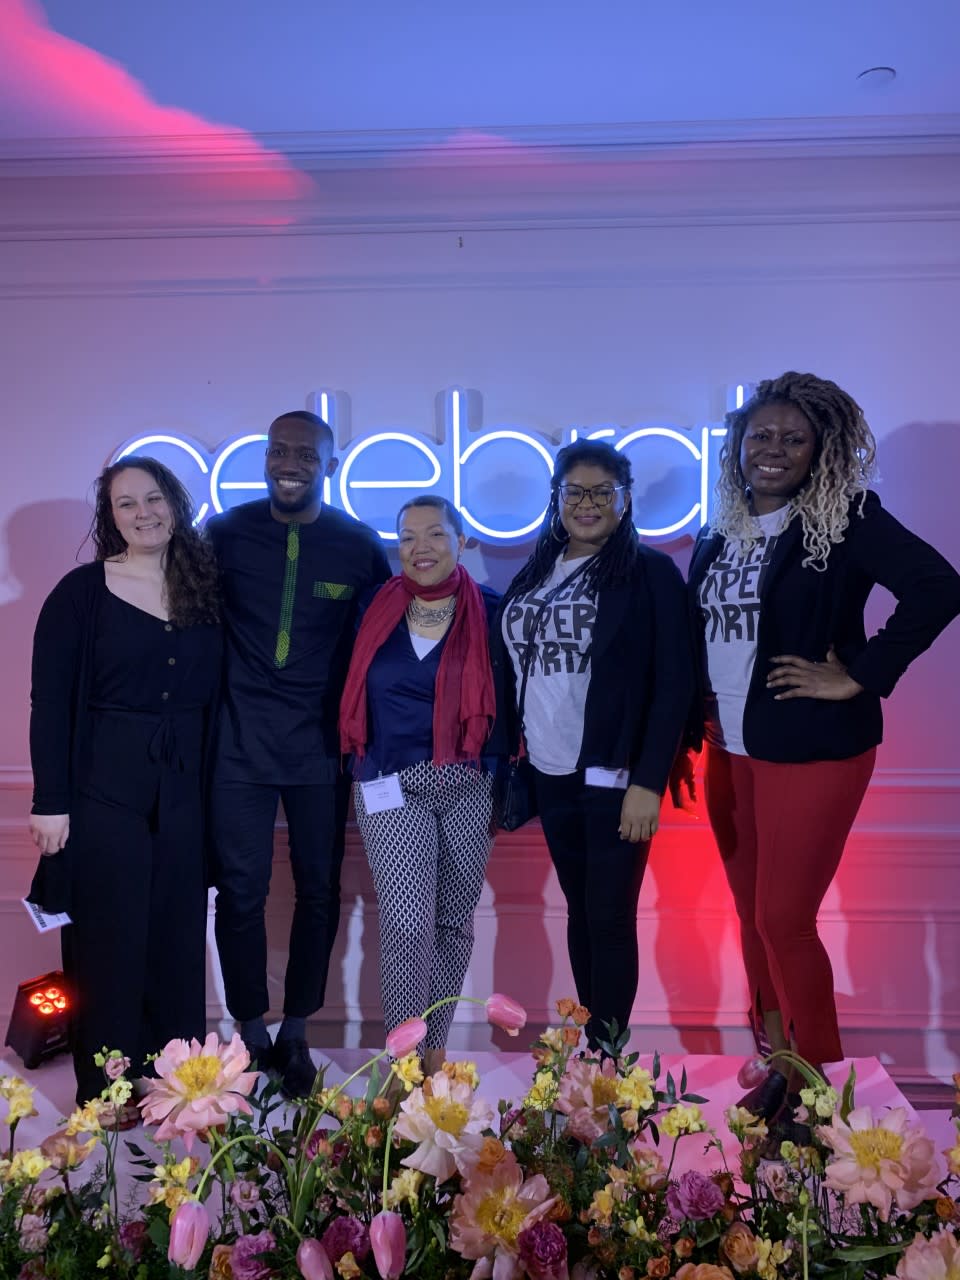 Emily Cunningham and Kwami Williams of True Moringa, Anne Beal of Absolute Joi and J’Aaron Merchant and Madia Willis of Black Paper Party. - Credit: courtesy shot.